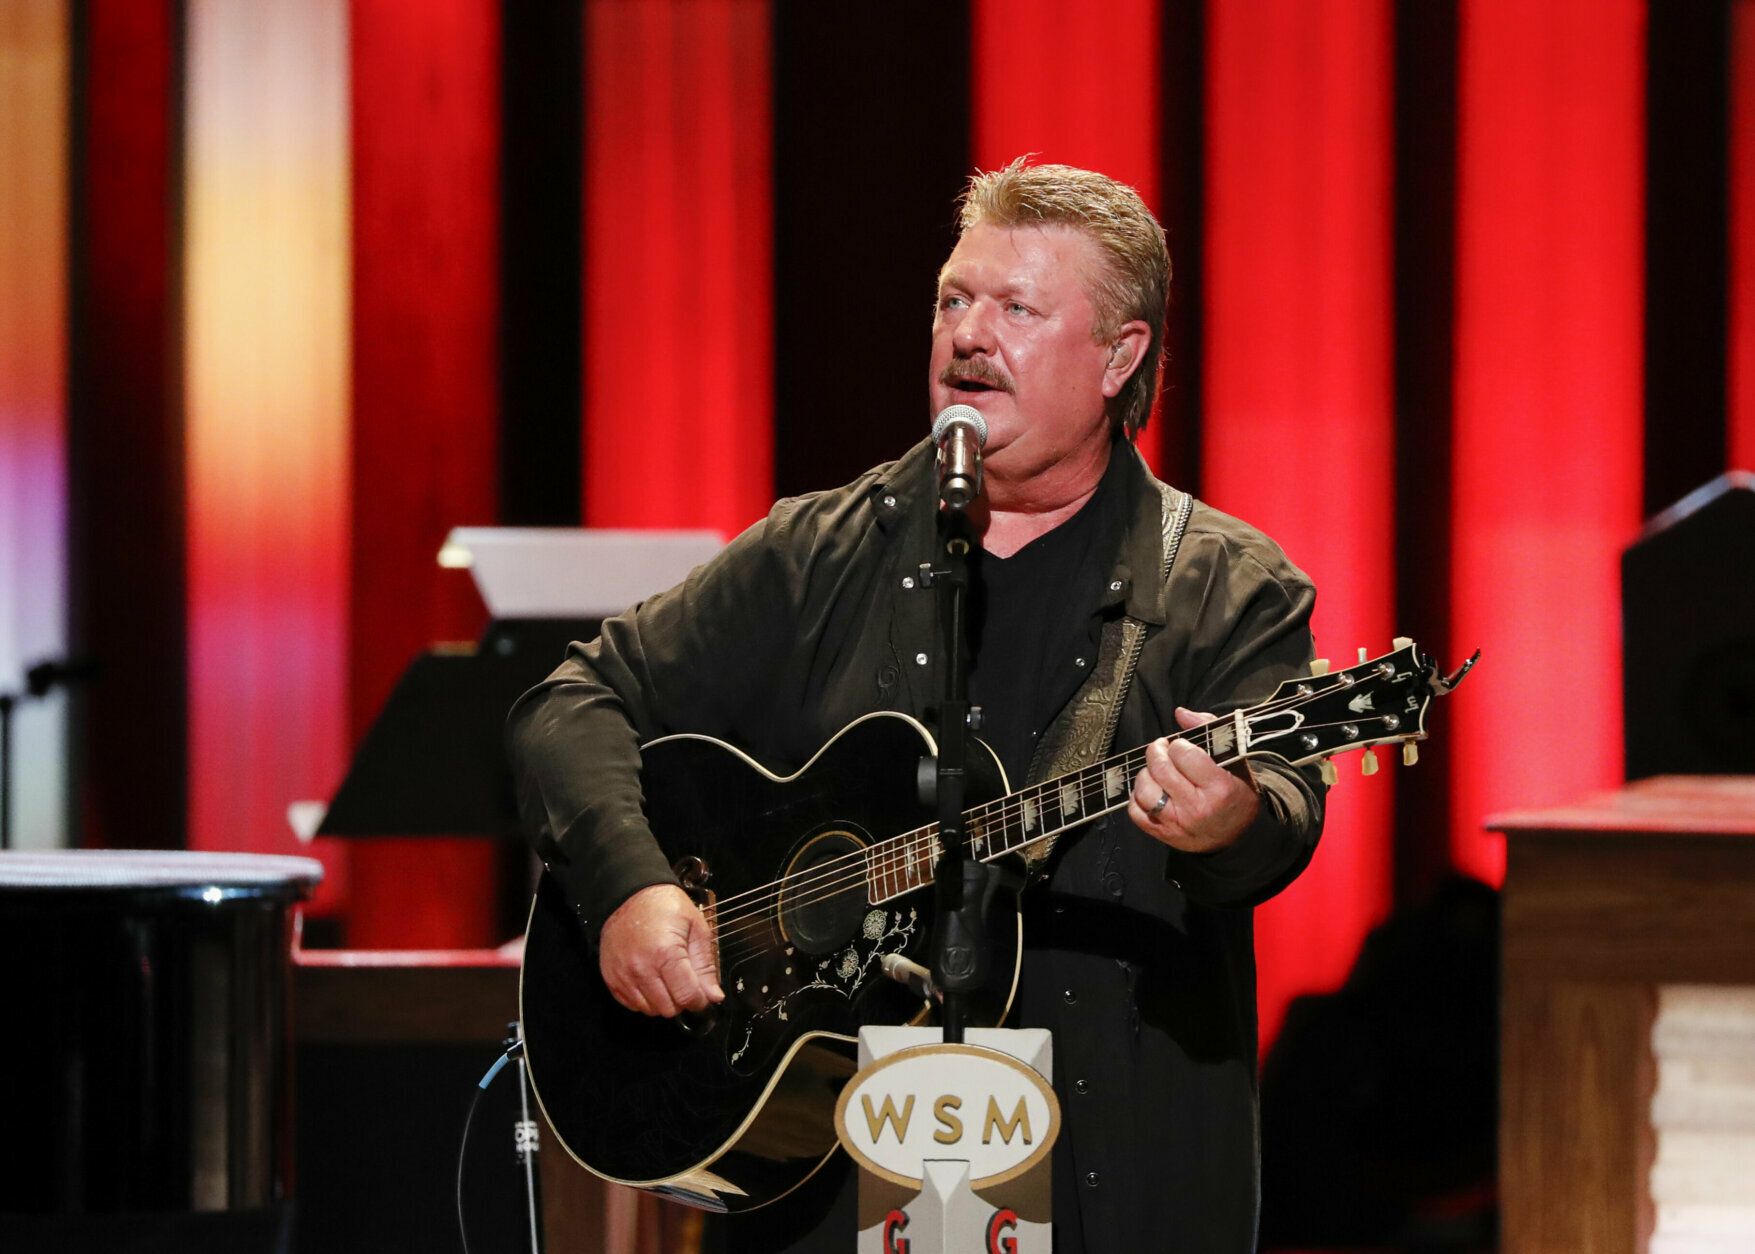 Joe Diffie performs at "Luke Combs Joins the Grand Ole Opry Family" at Grand Ole Opry on Tuesday, July 16, 2019 in Nashville, Tenn. (Photo by Al Wagner/Invision/AP)